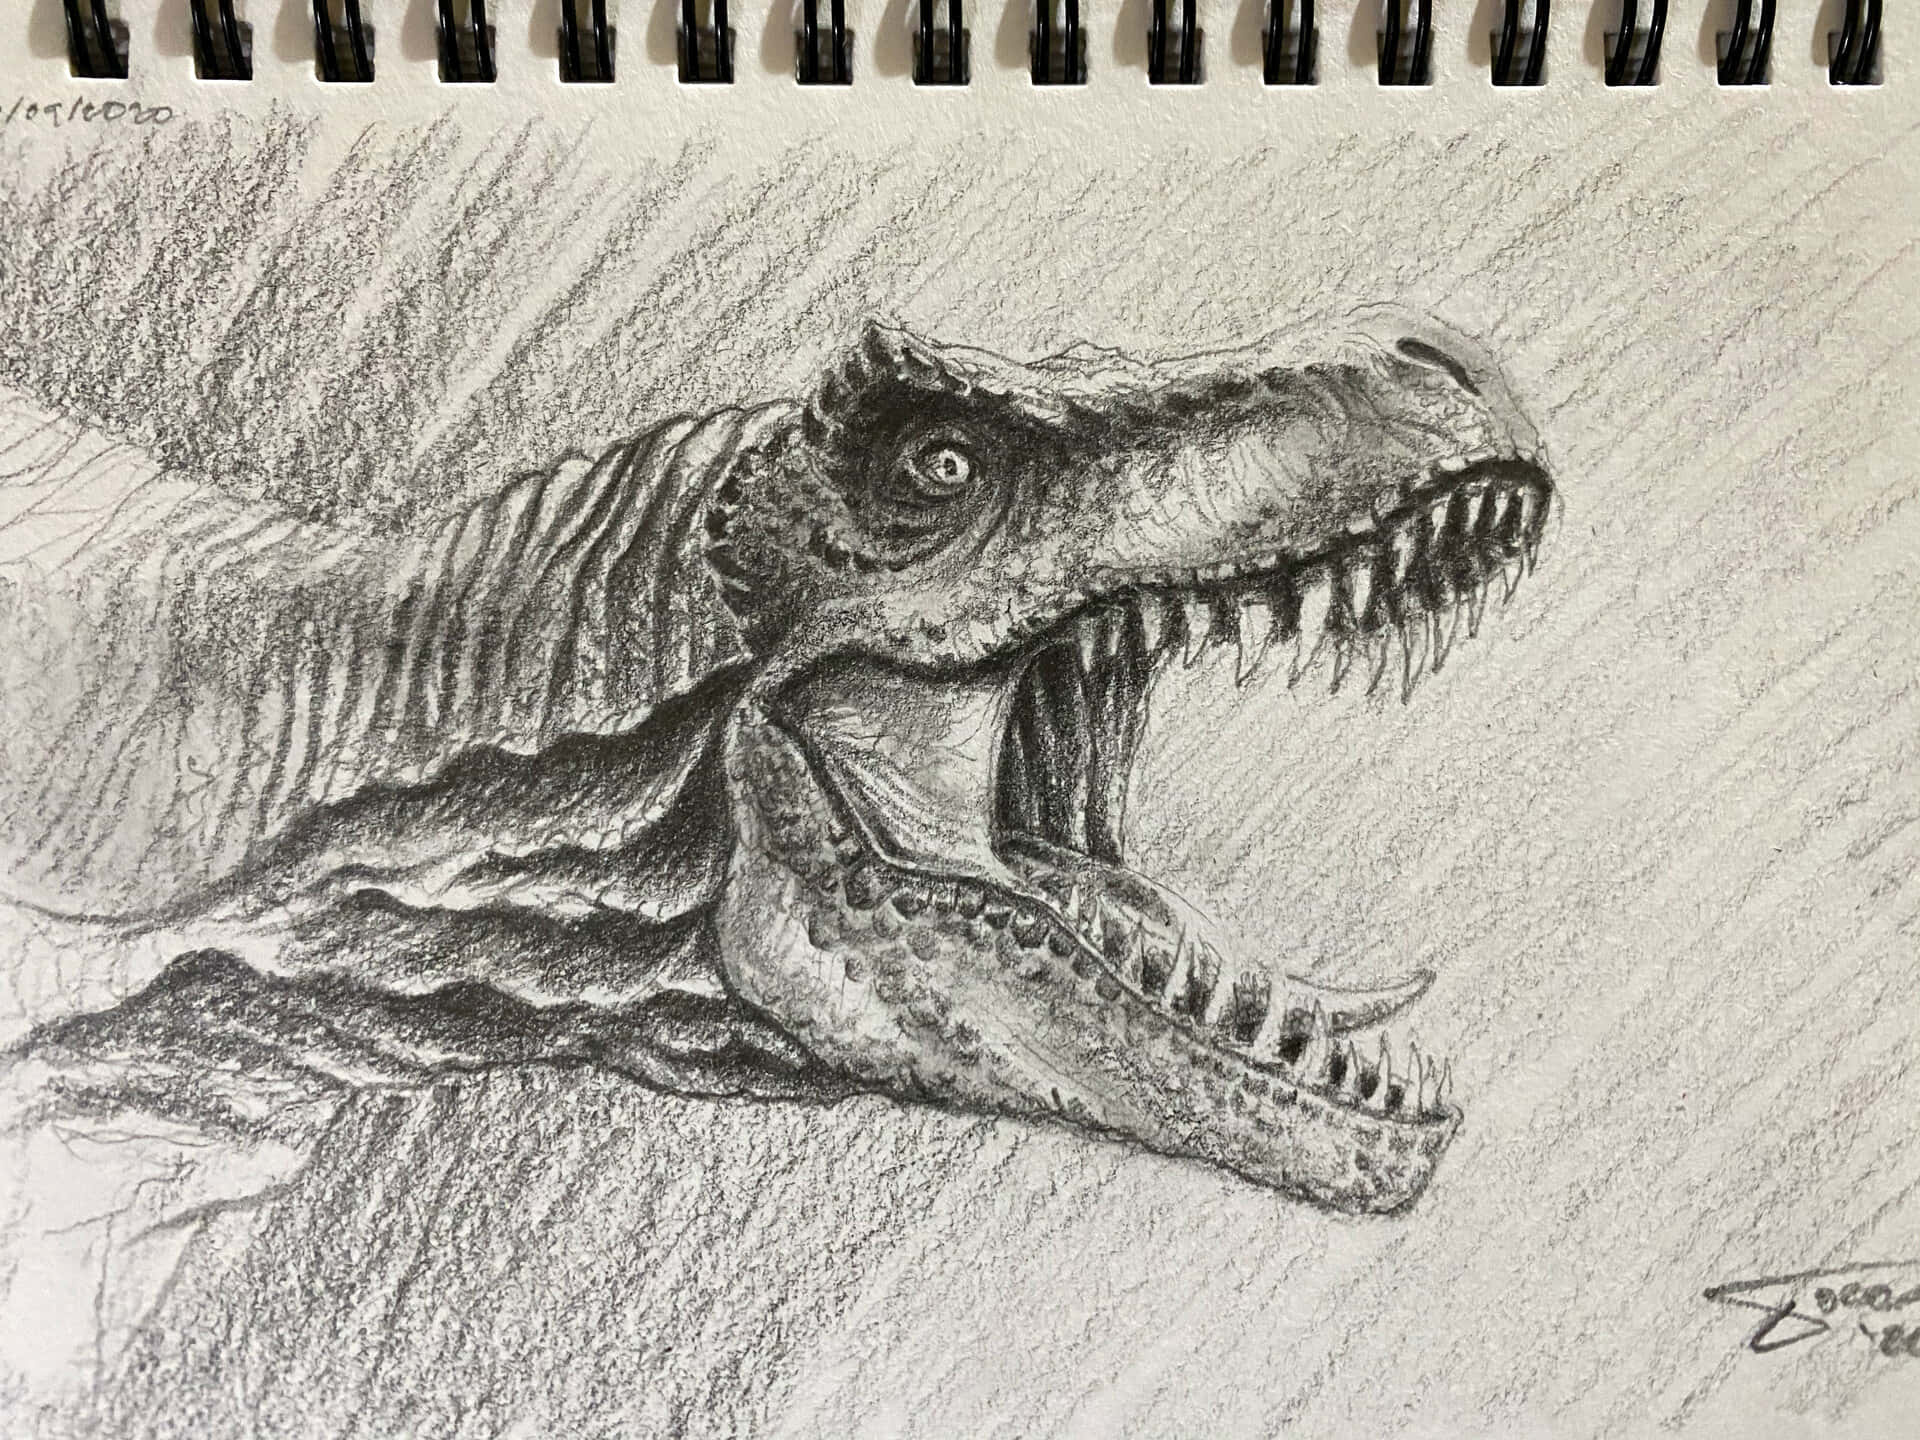 100+] Dinosaur Drawing Pictures | Wallpapers.com